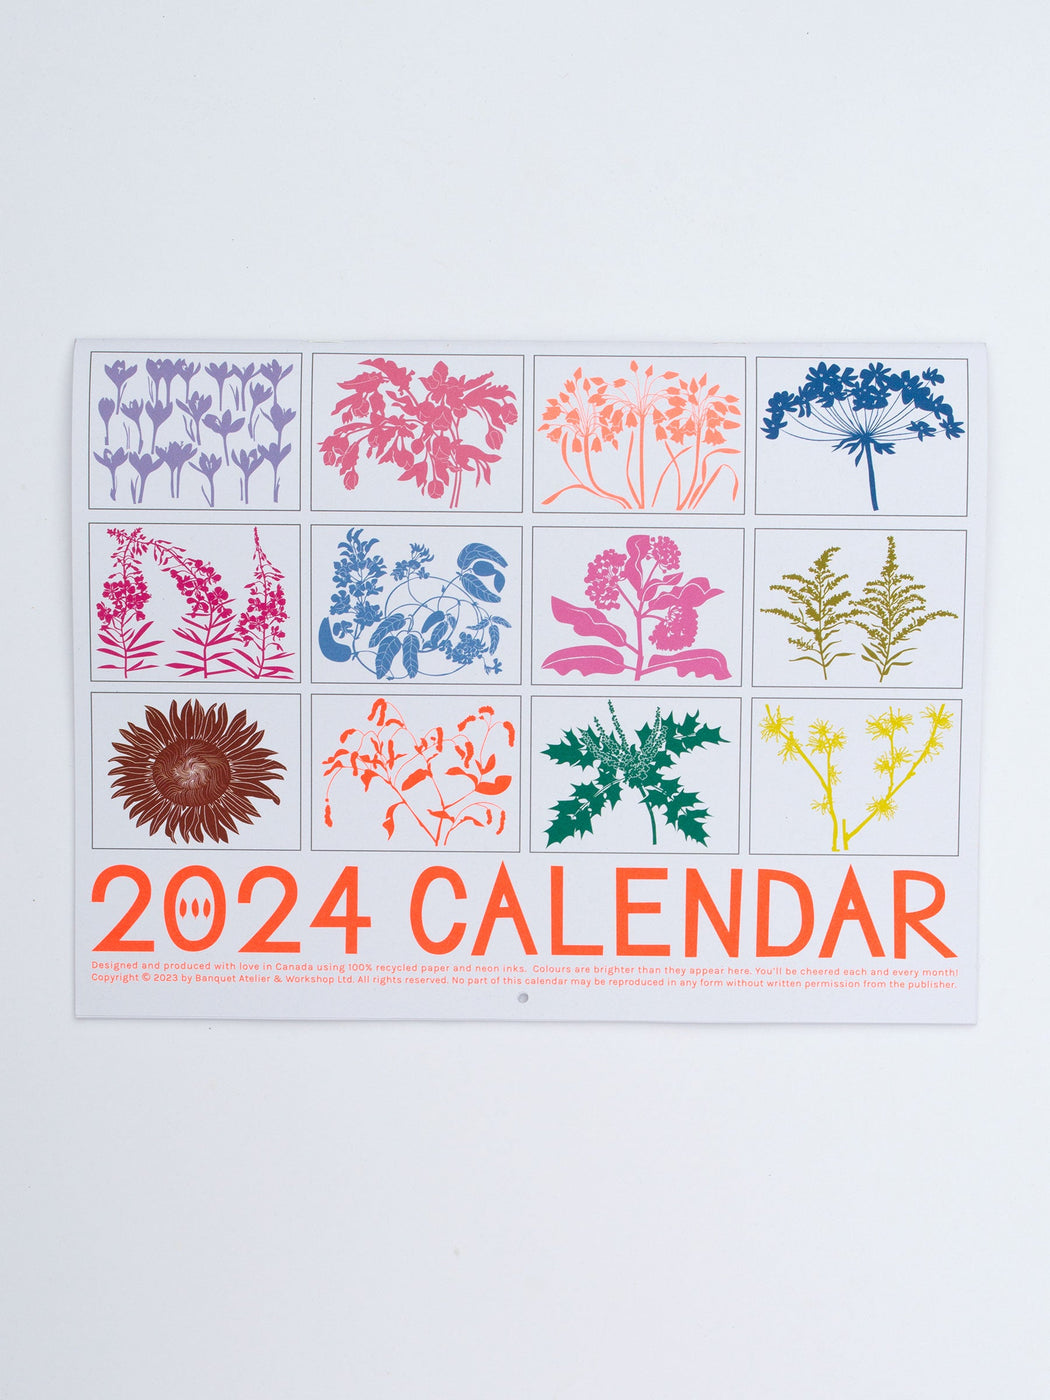 Back cover of banquet Workshop's 2024 calendar featuring illustrations of pollinator plants